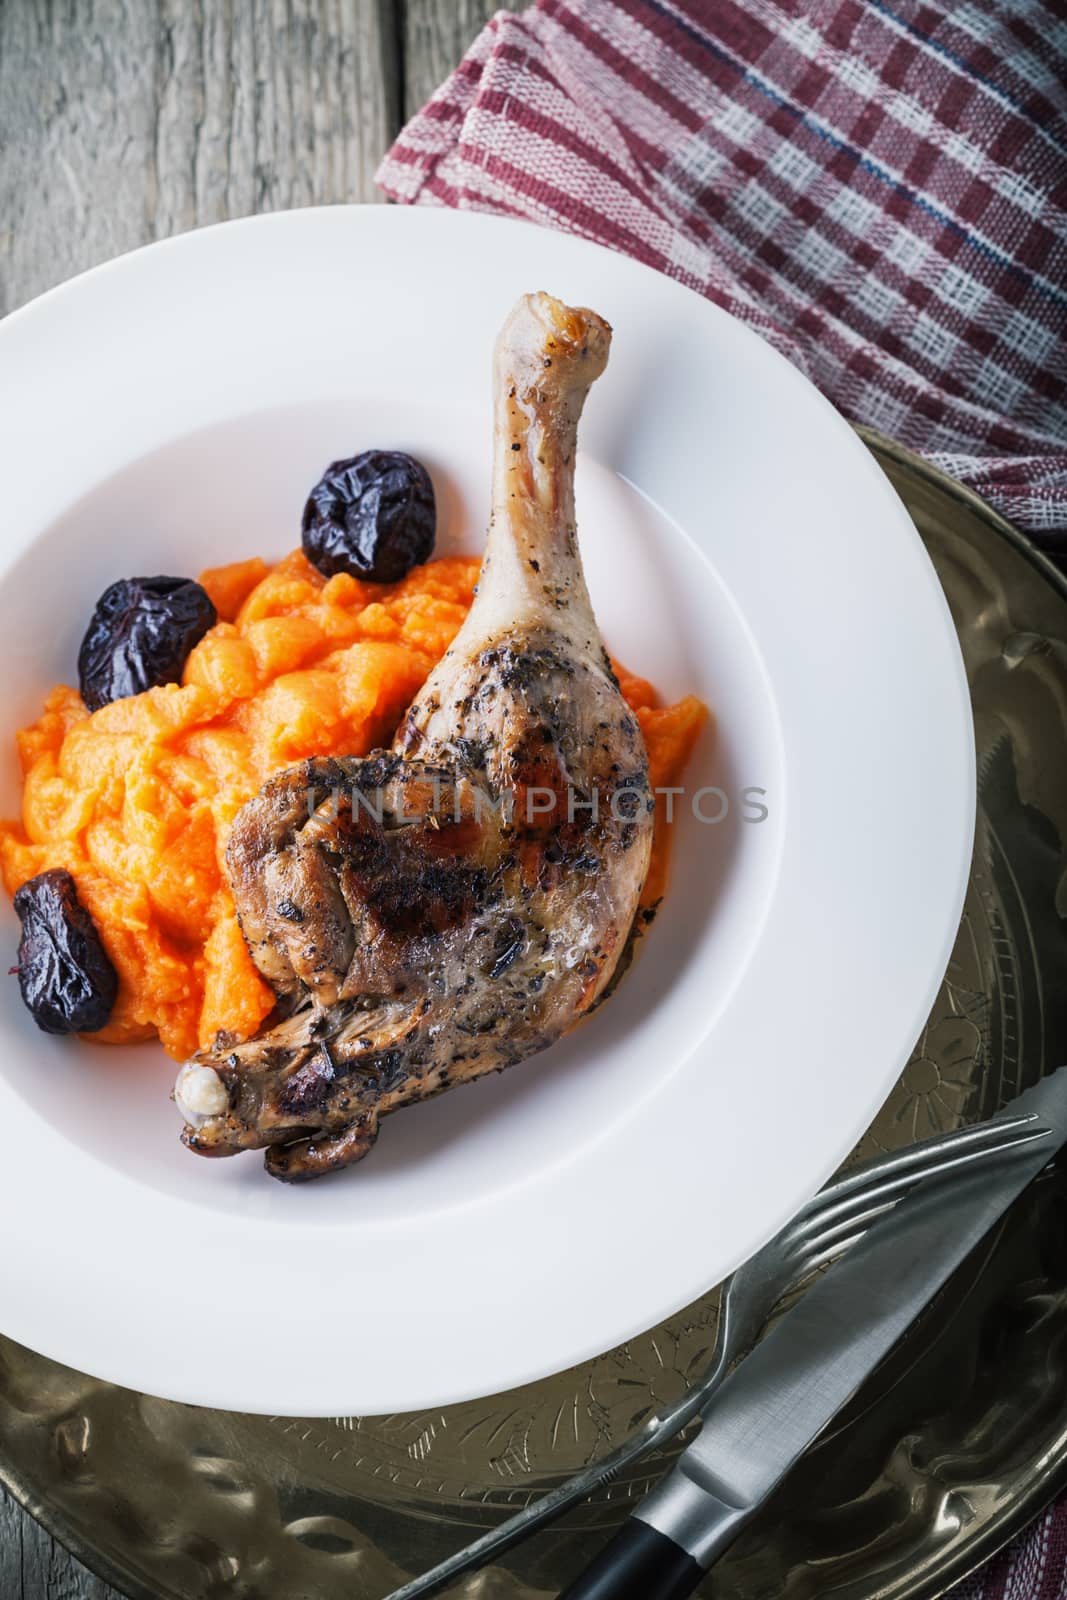 Roasted duck leg with mashed carrot and dried prunes by supercat67